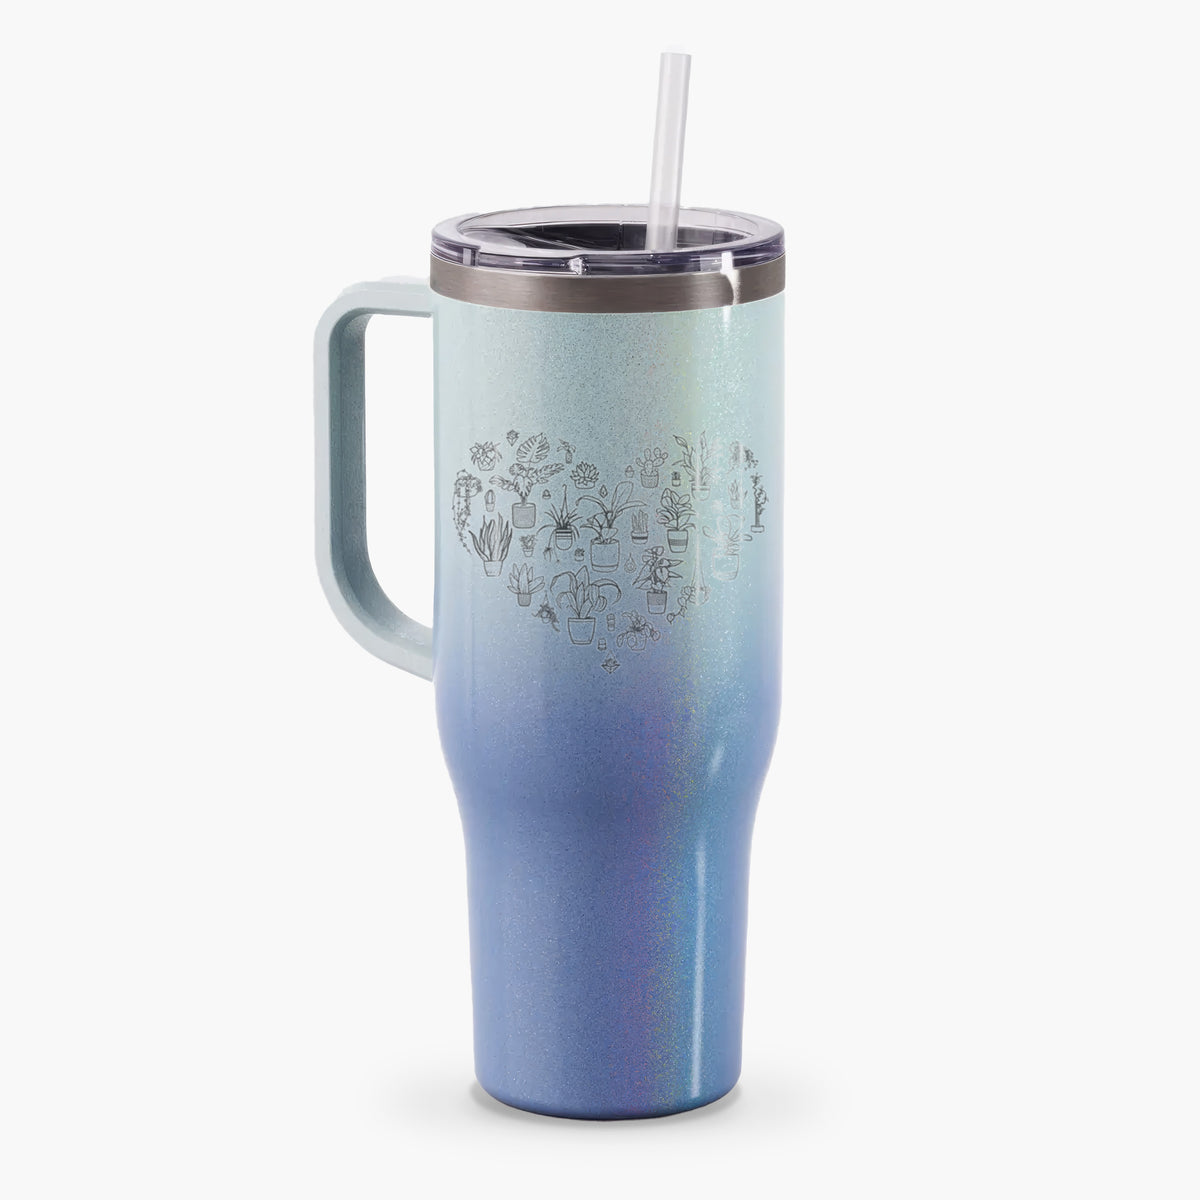 Heart Full of House Plants - 40oz Tumbler with Handle